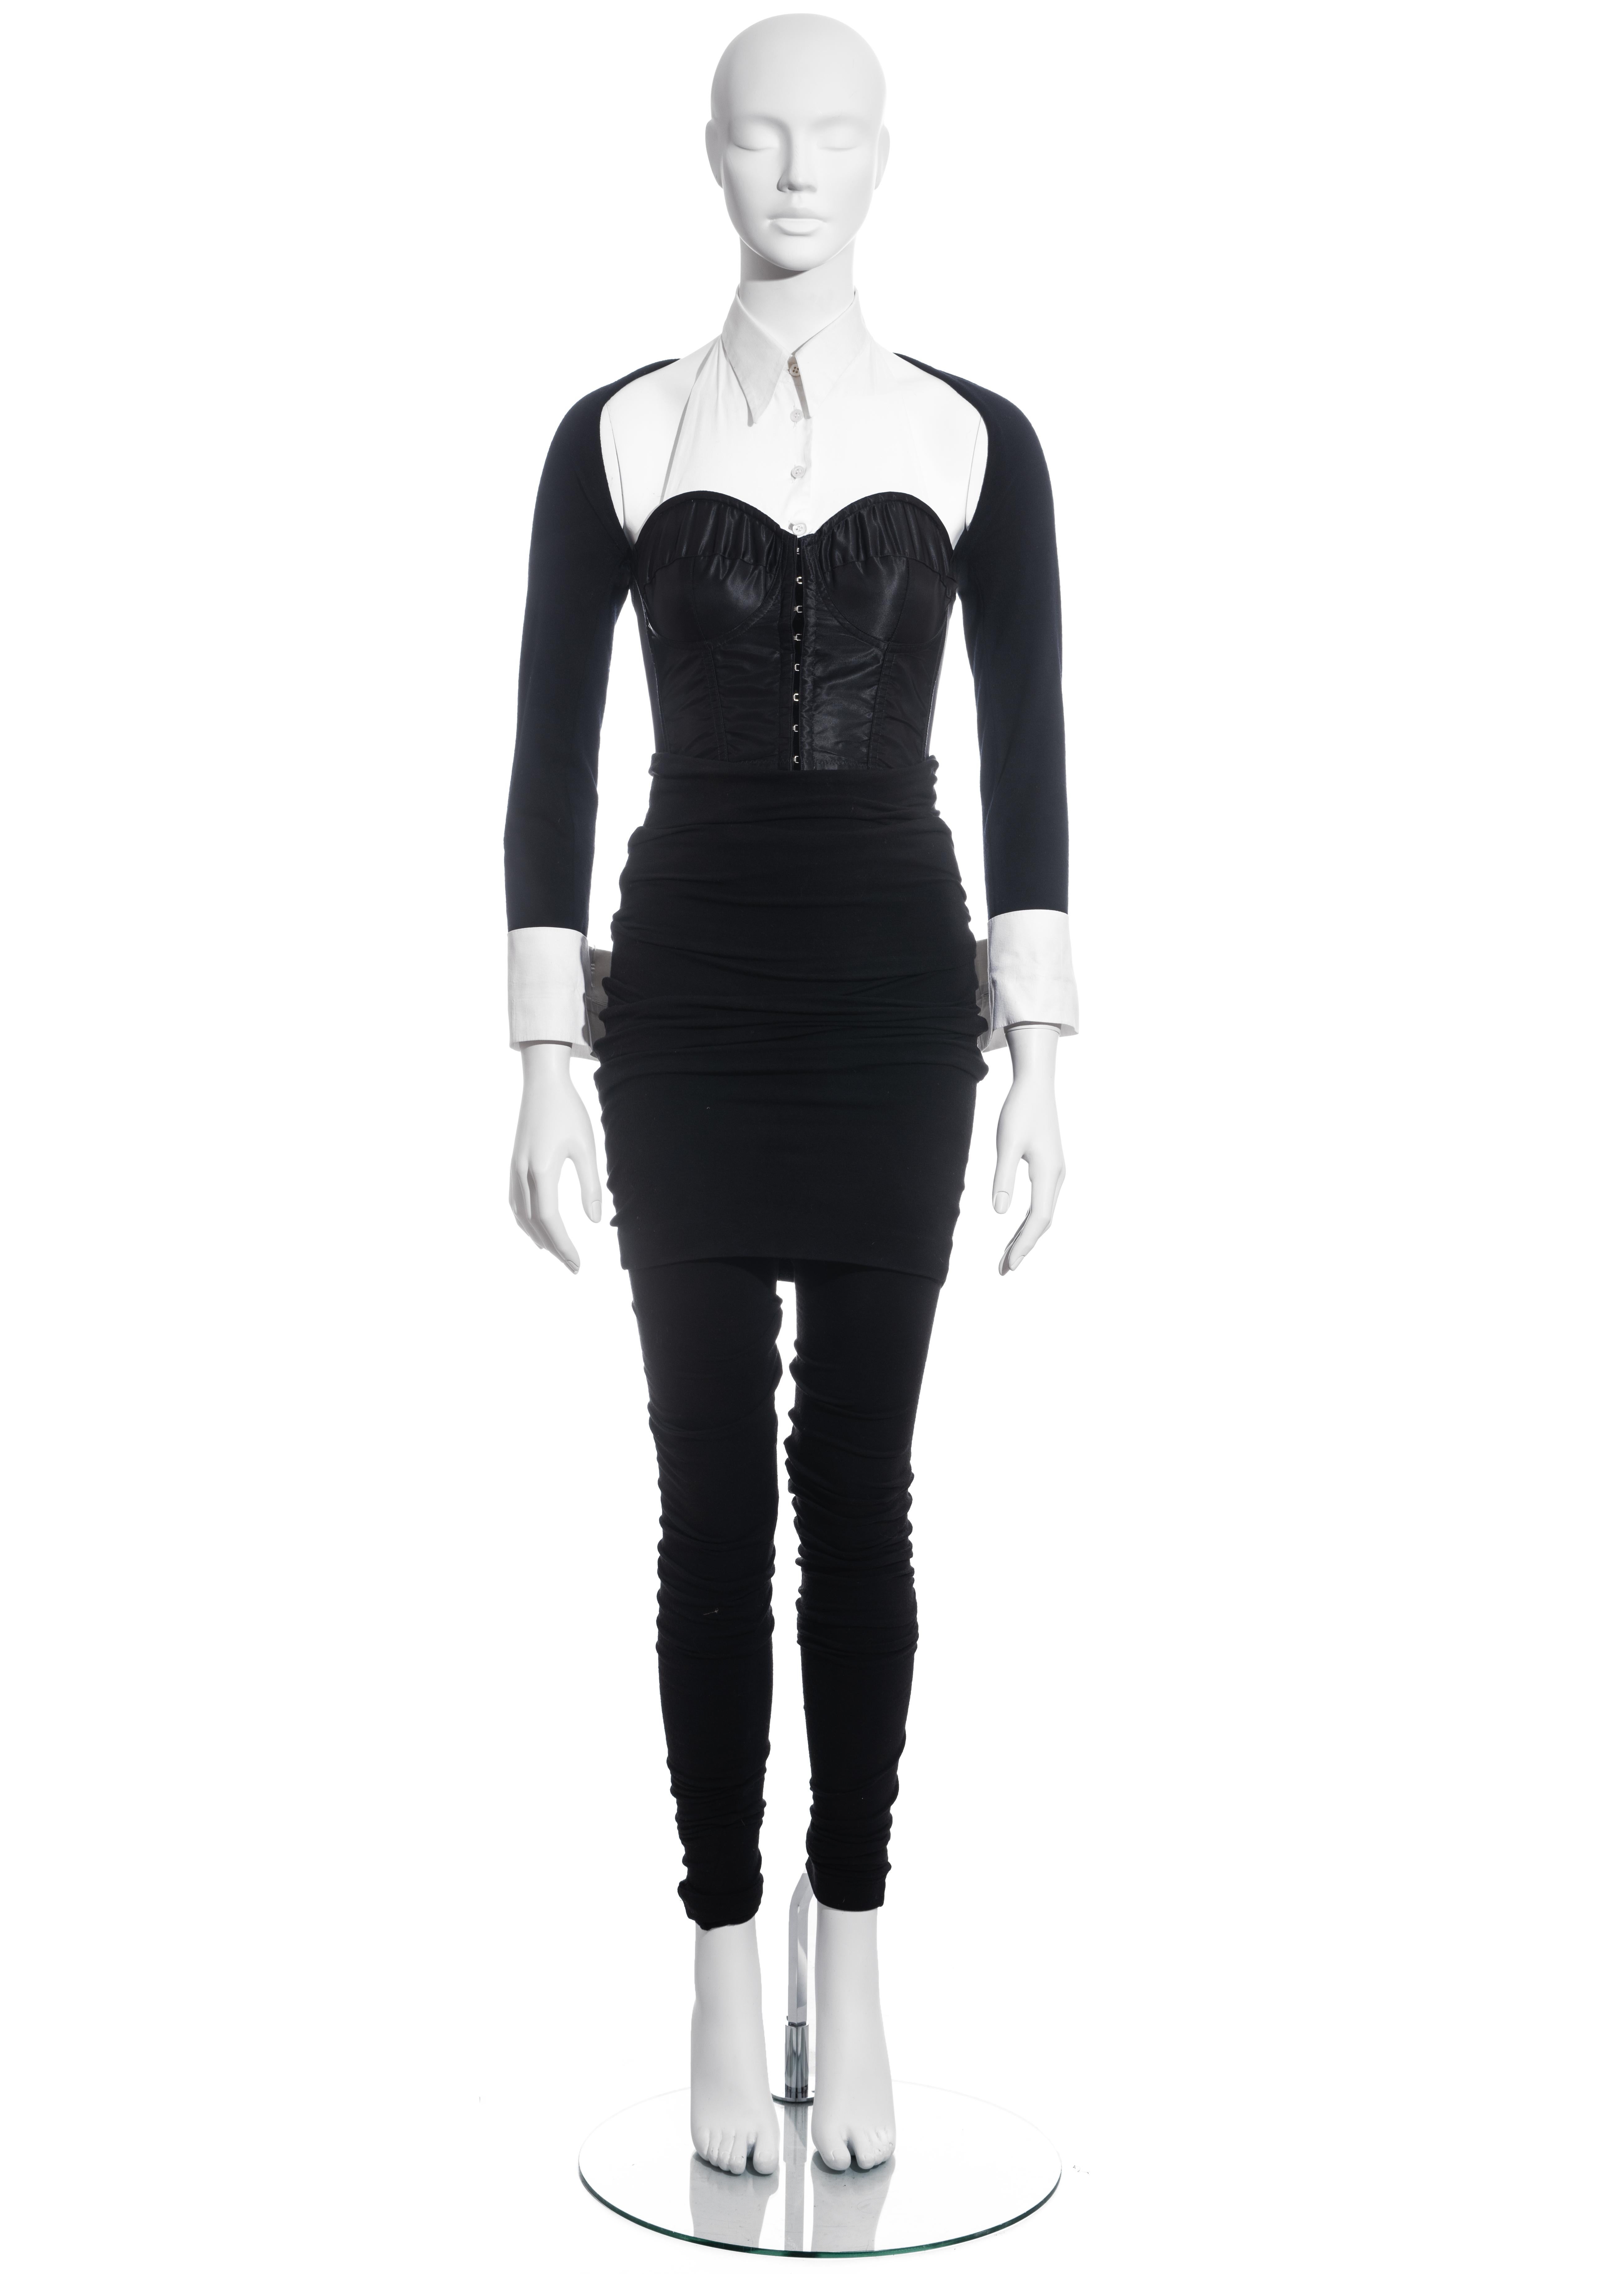 ▪ Dolce & Gabbana black corset suit
▪ Satin corset with attached white cotton shirt collar and cuffs
▪ Internal boning 
▪ Wool jersey sleeves 
▪ Extra long ruched wool jersey leggings with turn-over mini skirt 
▪ IT 40 - FR 36 - UK 8 - US 4
▪